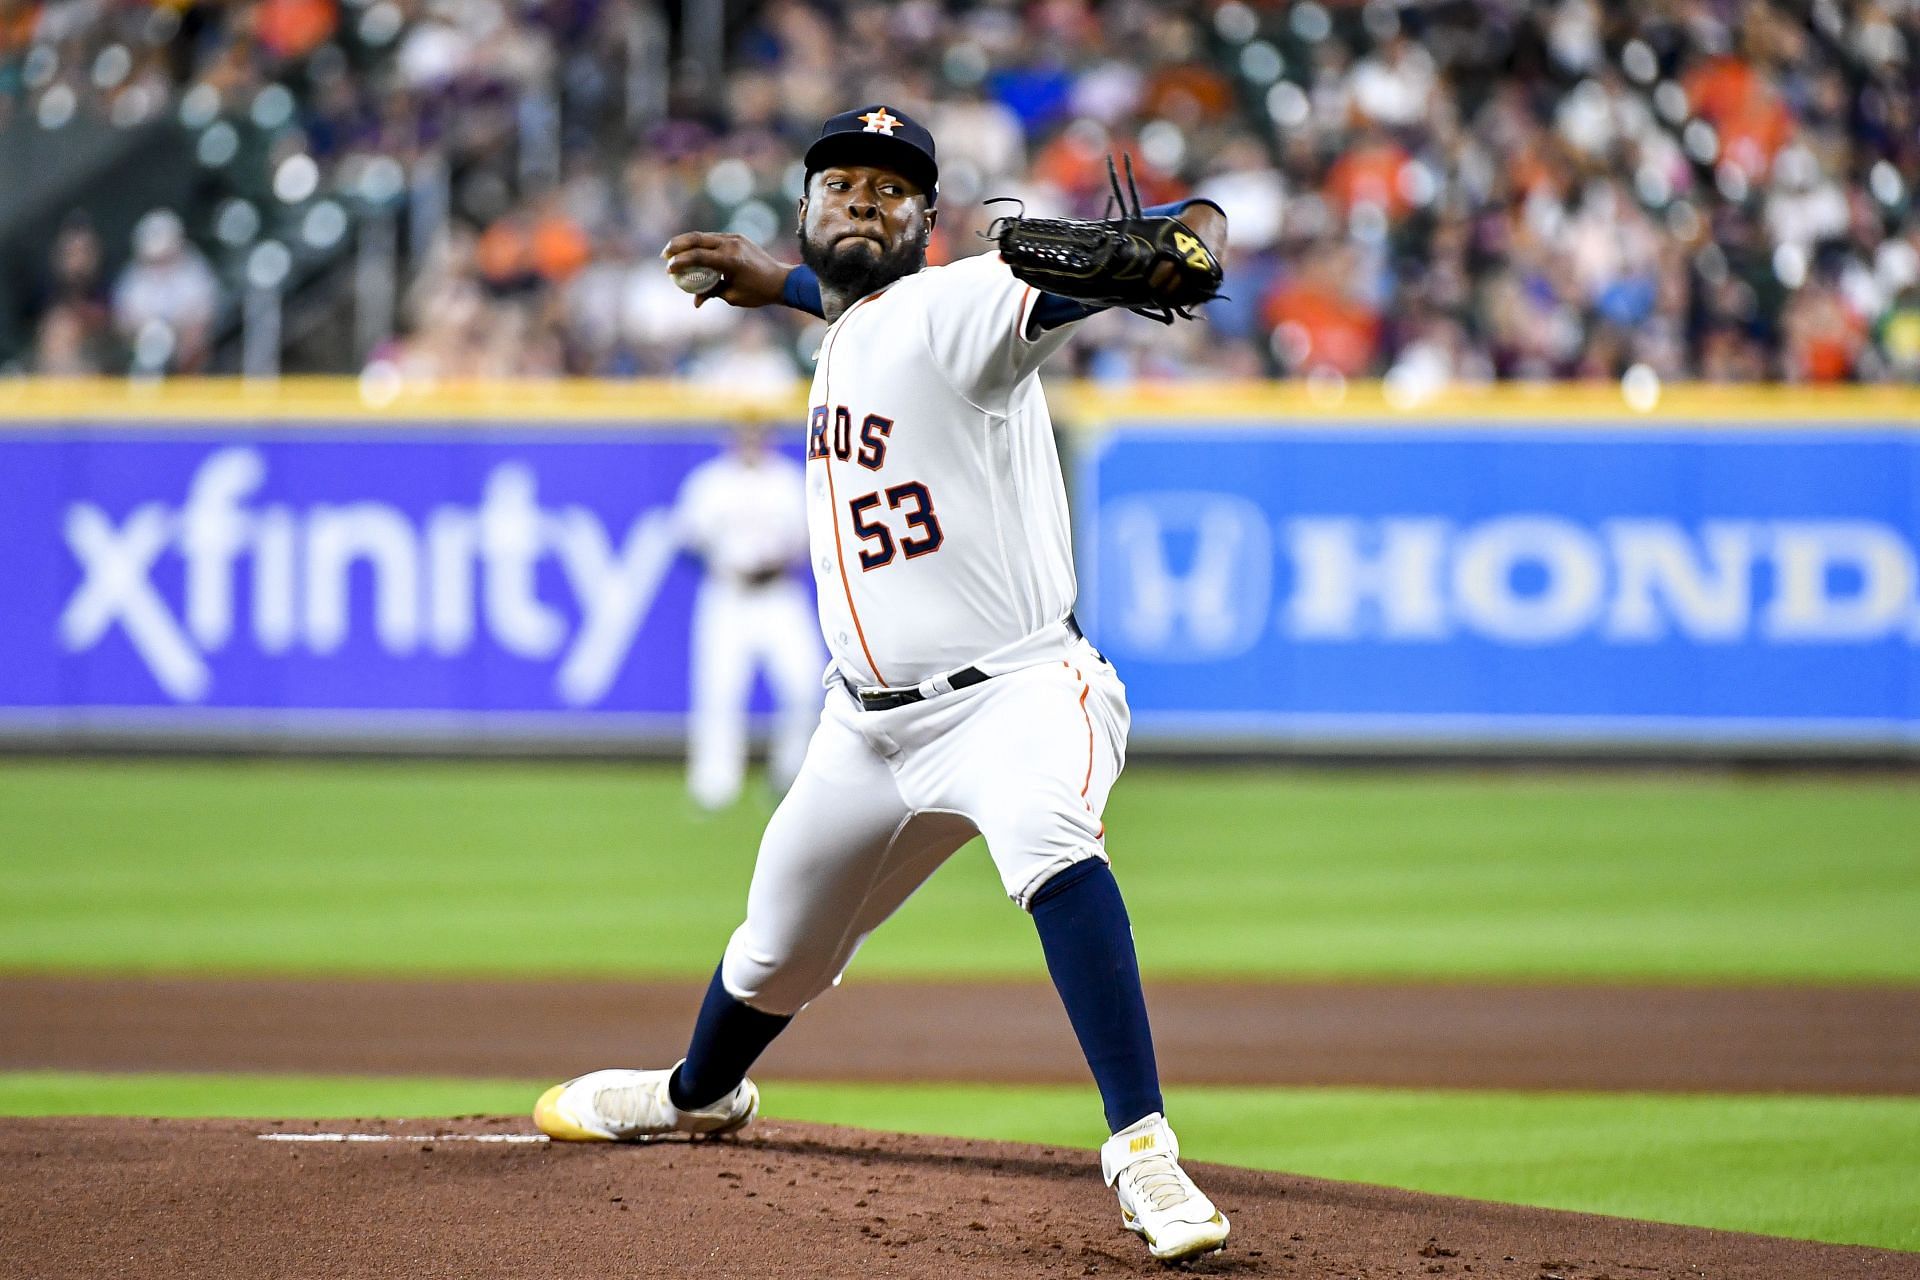 Cristian Javier of the Houston Astros pitches in the first inning against the Kansas City Royals.